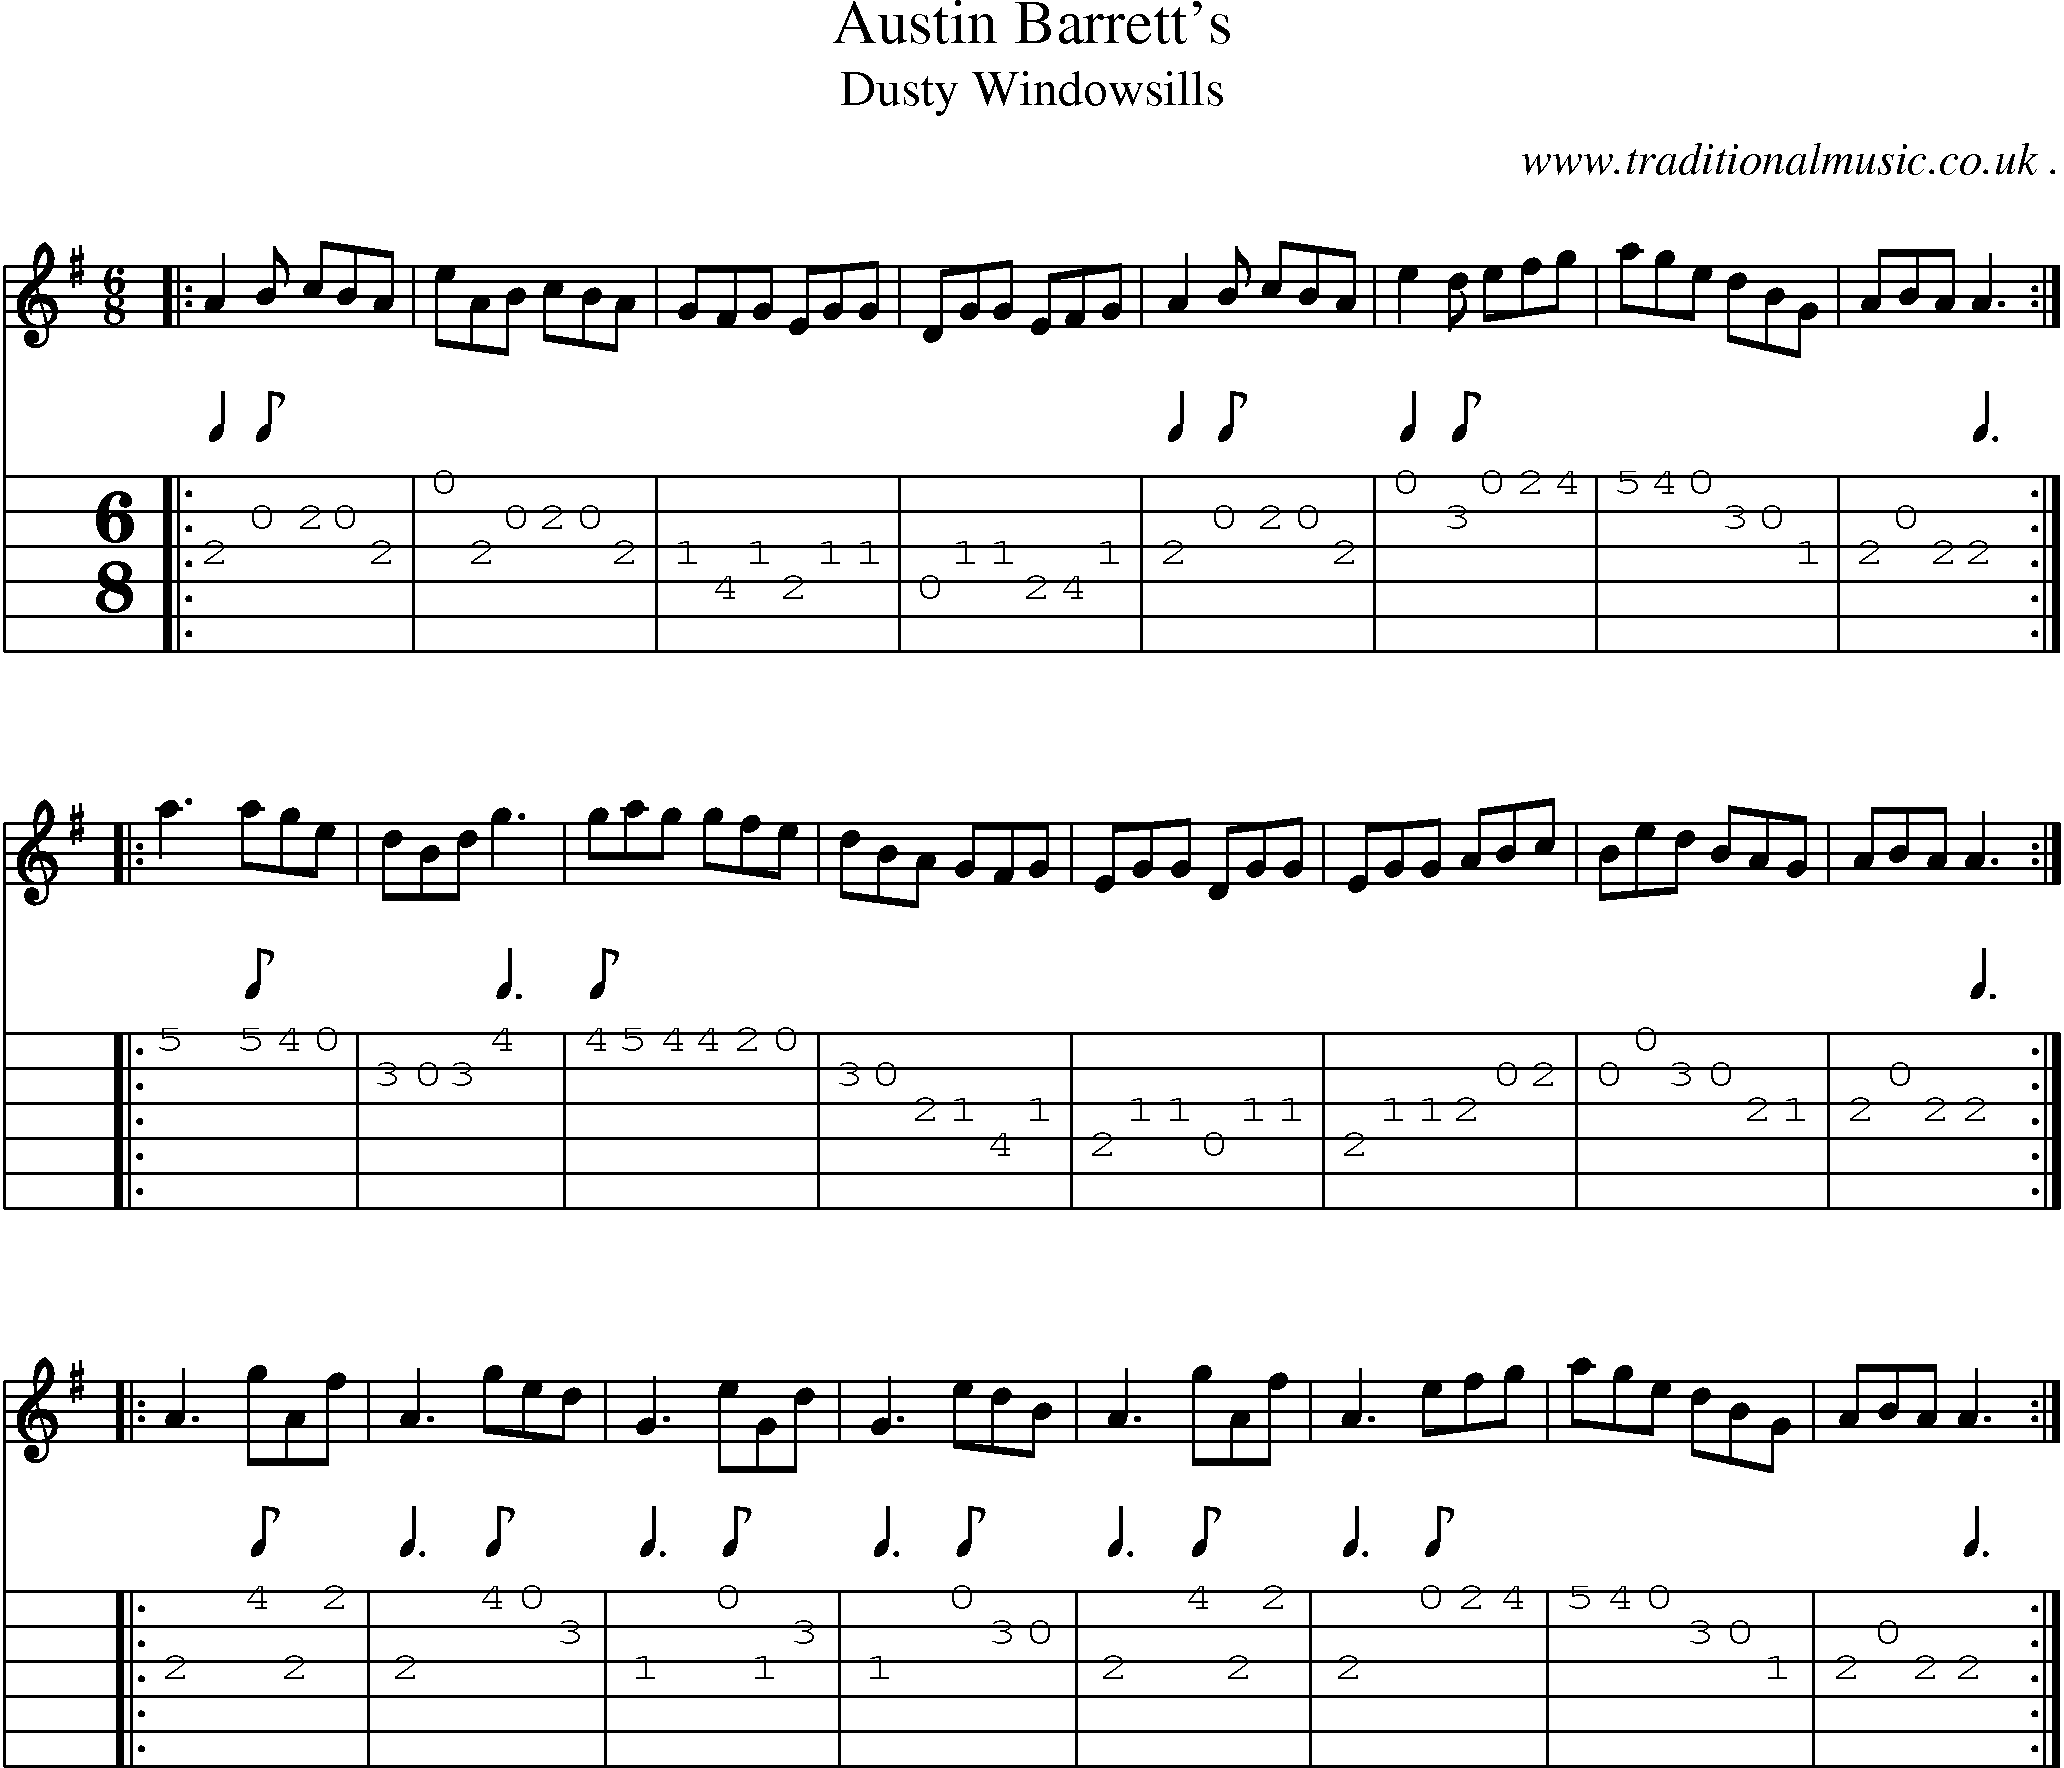 Sheet-music  score, Chords and Guitar Tabs for Austin Barretts